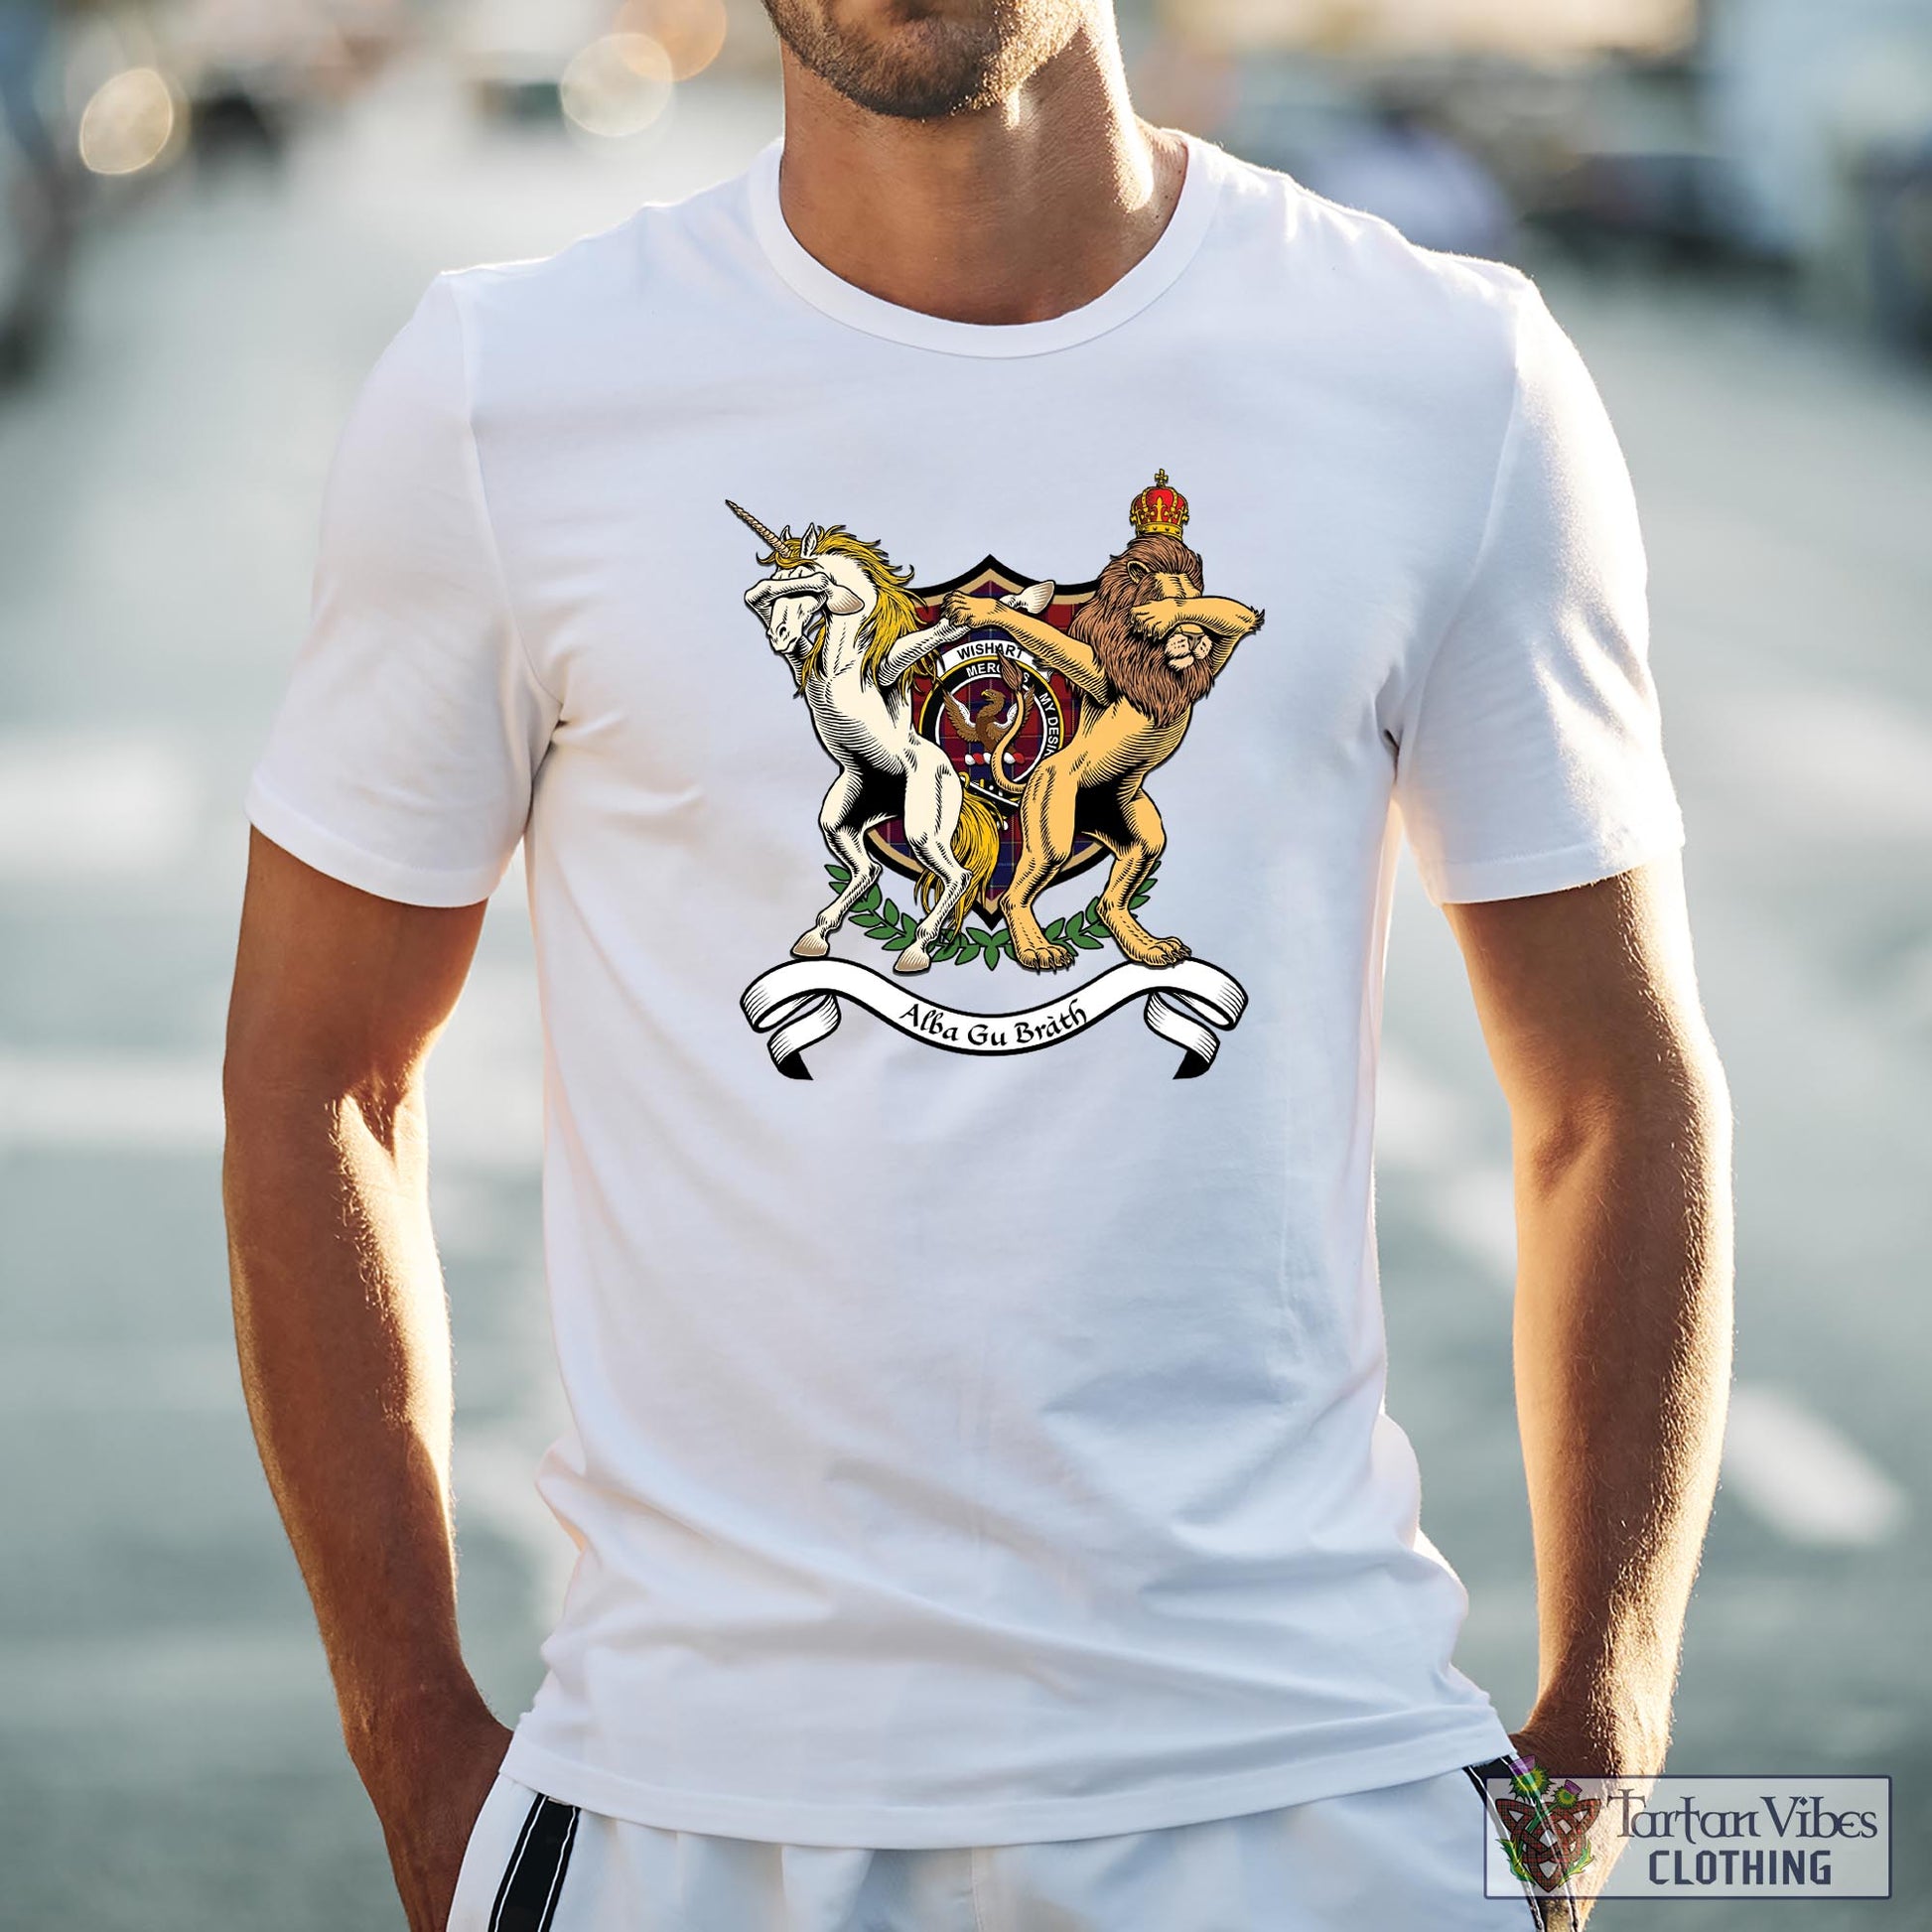 Tartan Vibes Clothing Wishart Dress Family Crest Cotton Men's T-Shirt with Scotland Royal Coat Of Arm Funny Style